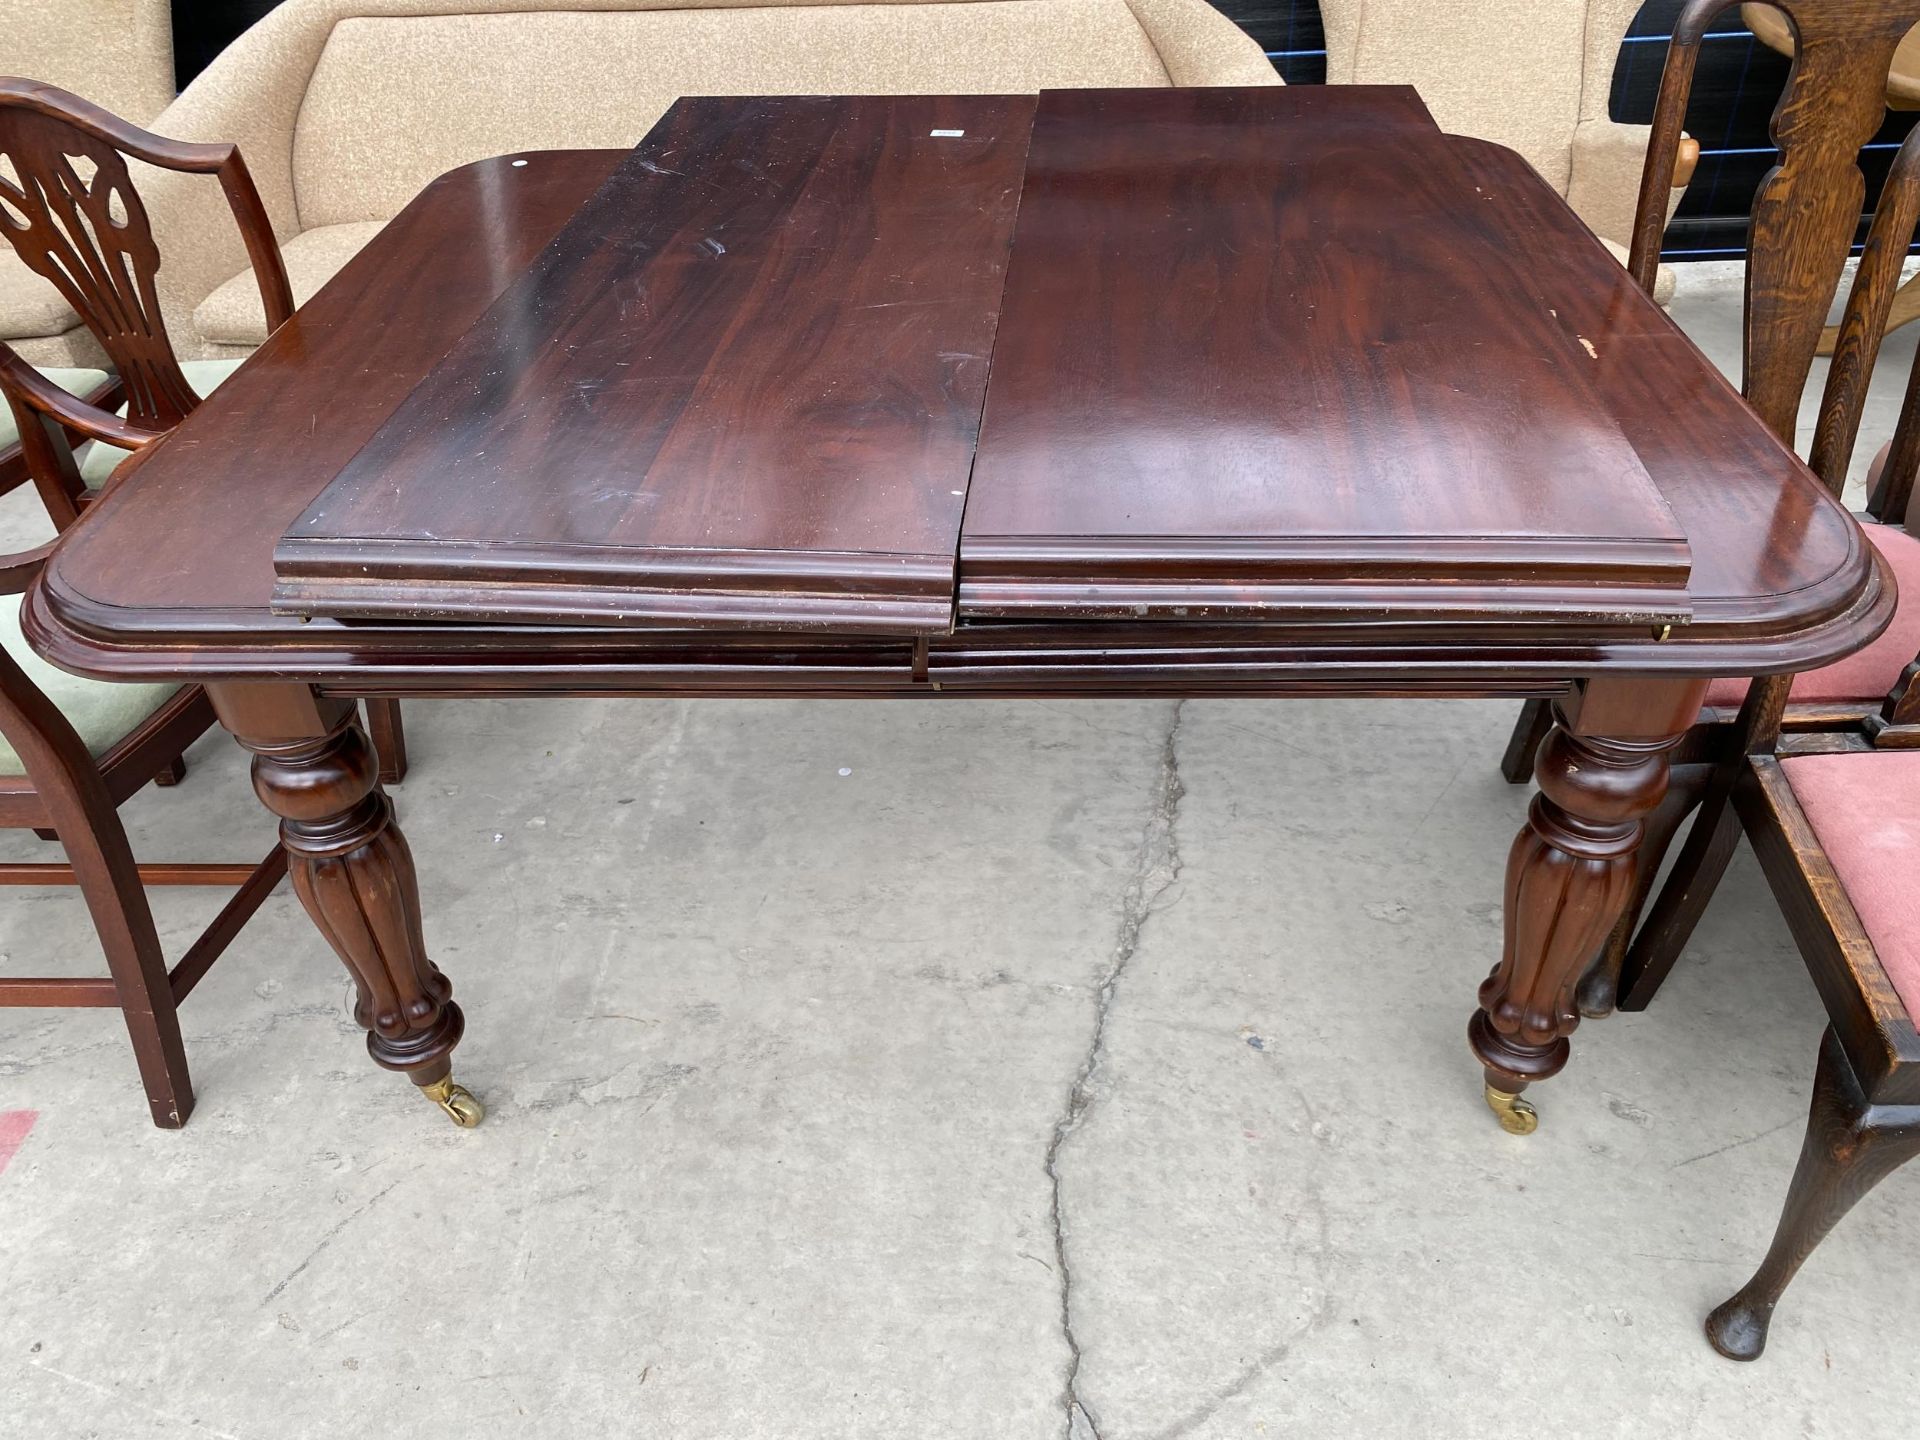 A VICTORIAN STYLE MAHOGANY PULL-OUT DINING TABLE, 59X48" (TWO LEAVES 19" EACH)